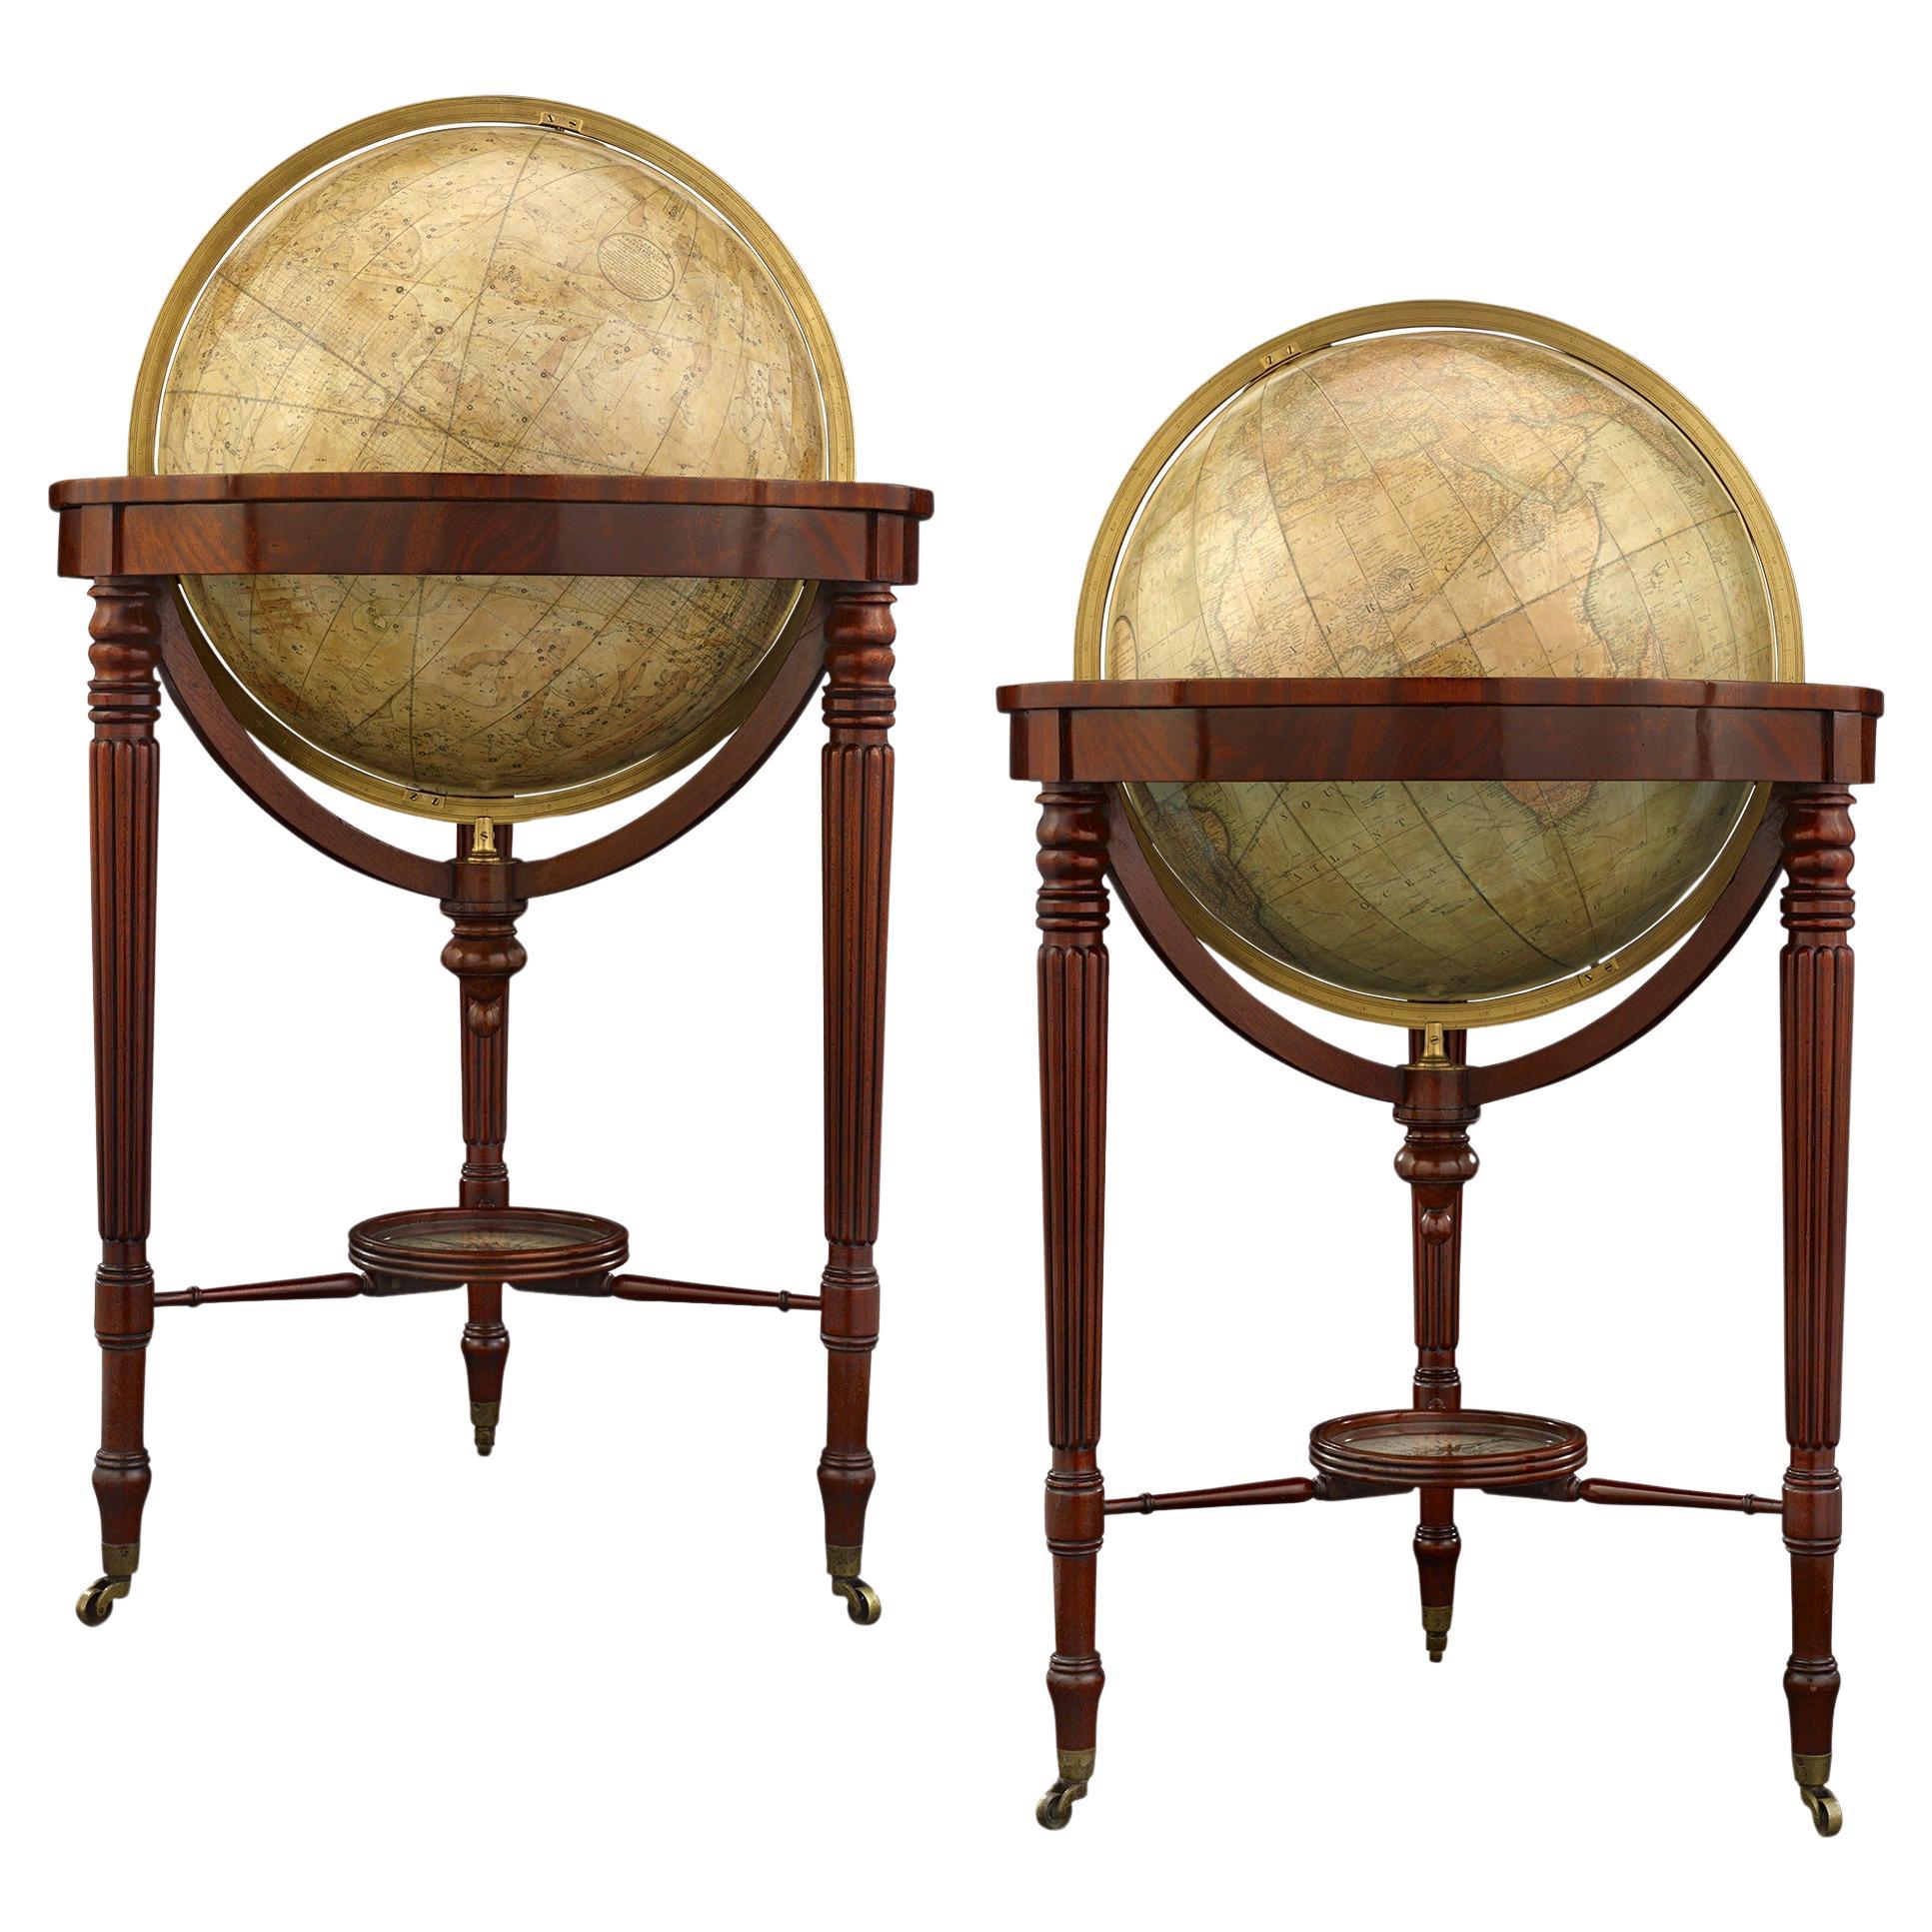 William IV Terrestrial And Celestial Floor Globes By J. W. Cary